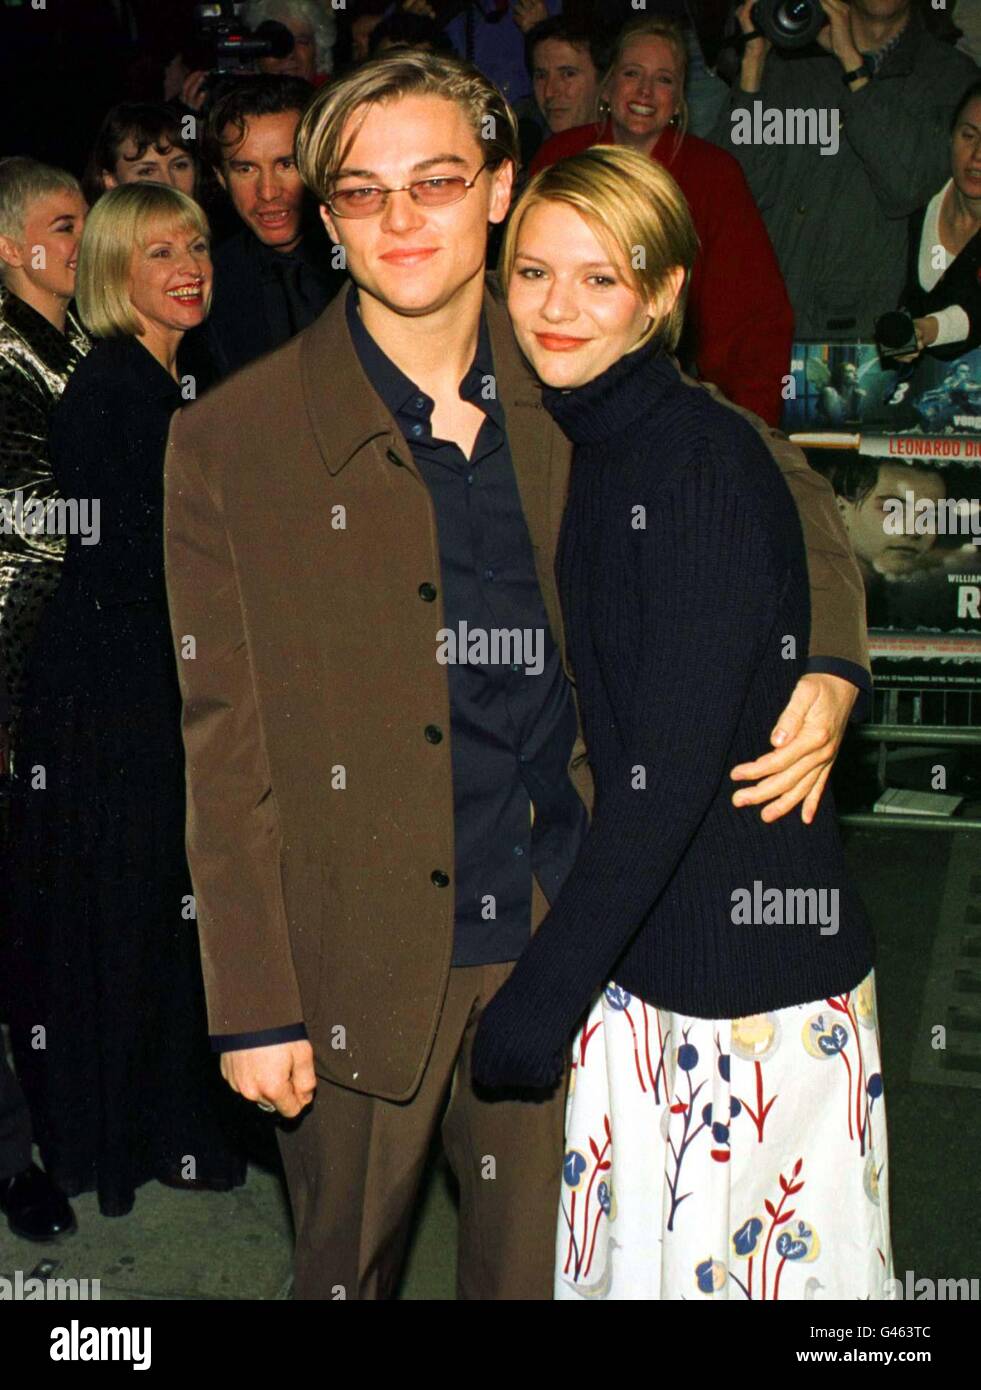 PA NEWS: LONDON : 26/3/97 : STARS OF ROMEO AND JULIET, LEO DICAPRIO AND CLAIRE DANES, ARRIVE AT THE CURZON CINEMA, MAYFAIR, FOR THE LONDON PREMIERE. PA NEWS PHOTO BY SAMANTHA PEARCE. Stock Photo